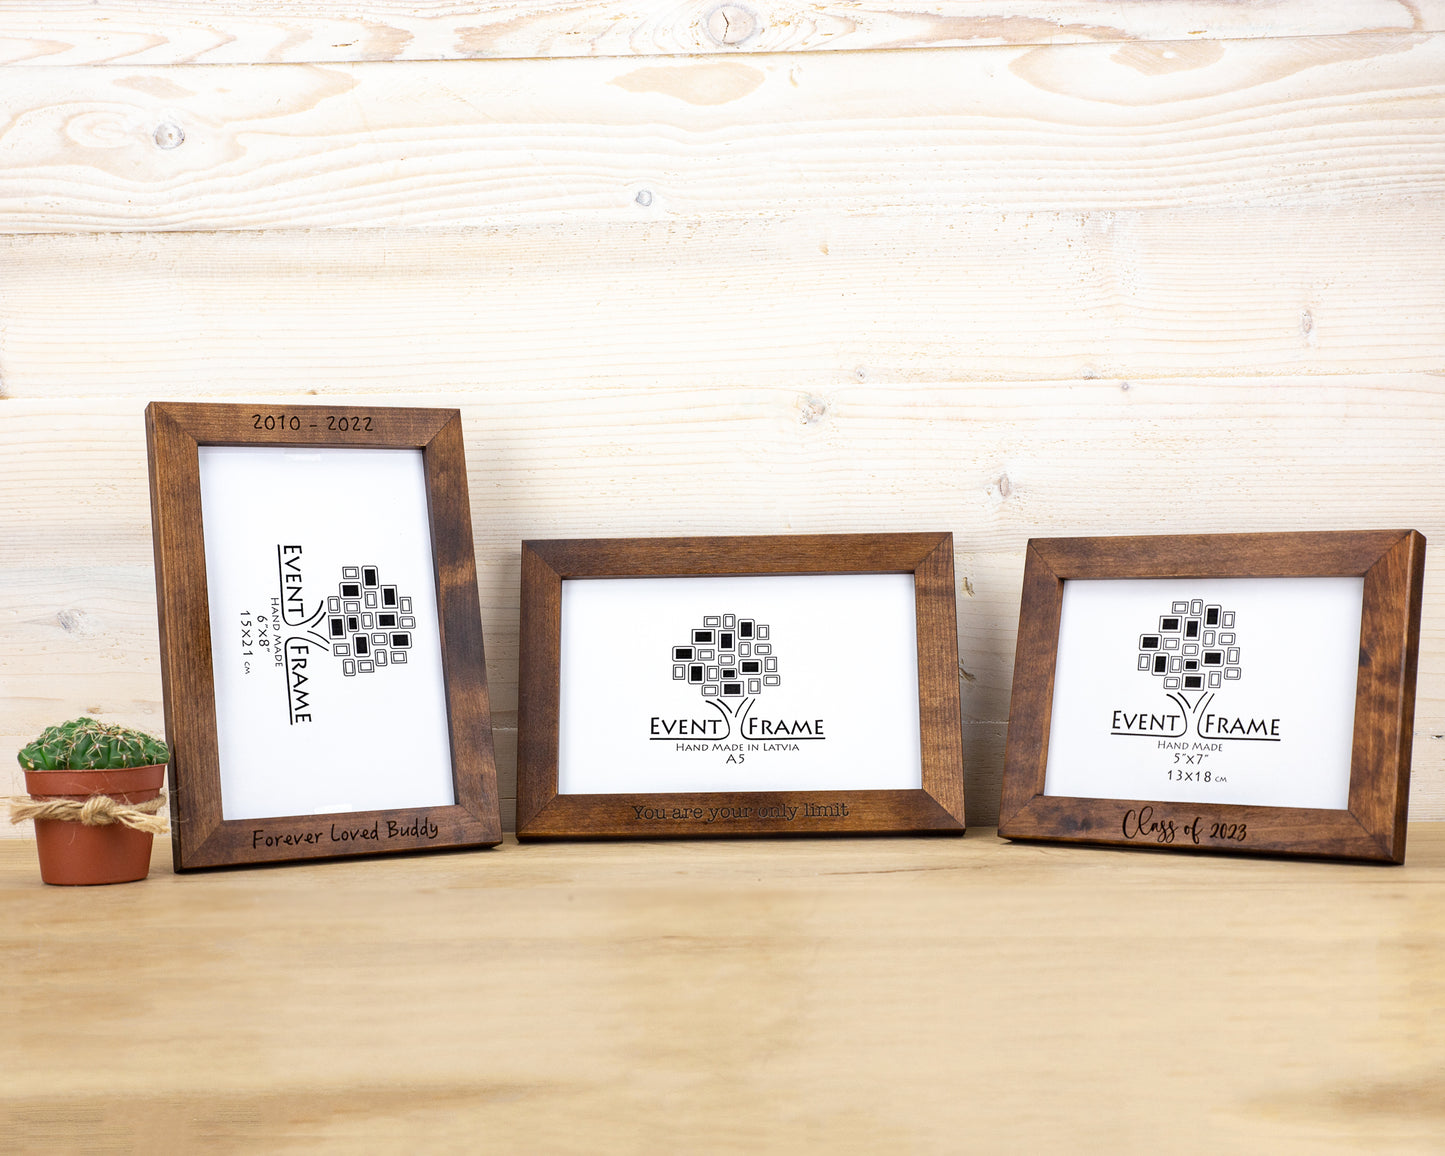 Engraved Brown Photo Frame from Solid Birch Wood